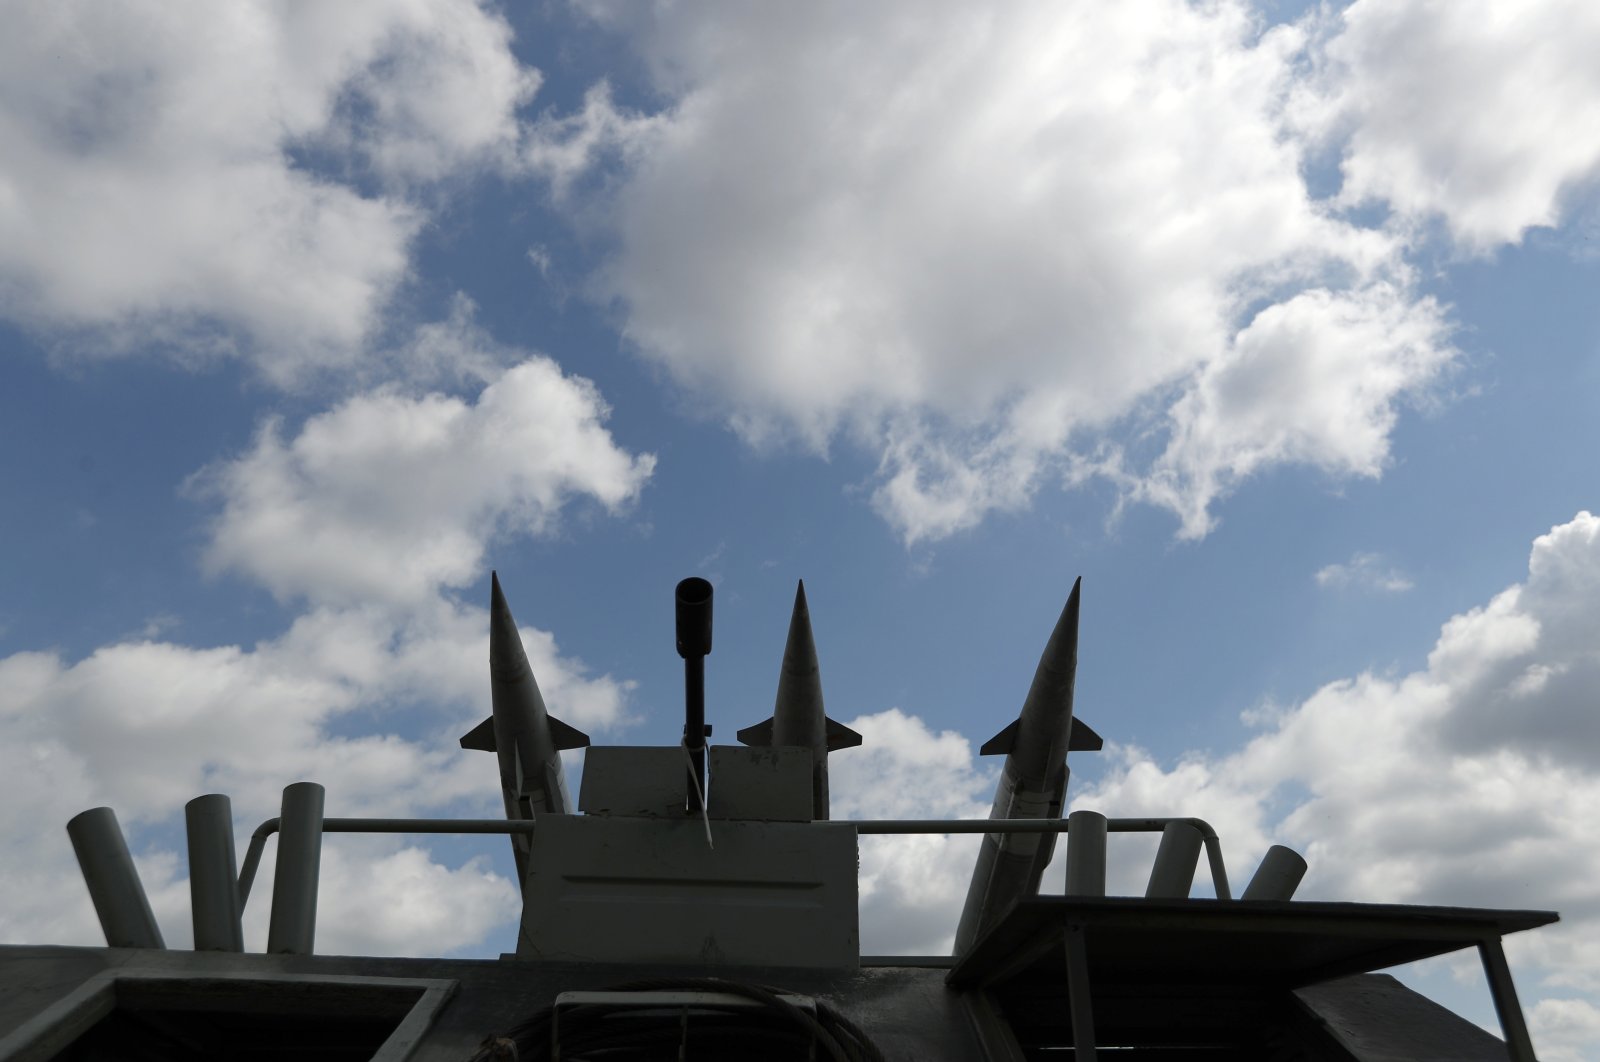 A model of an anti-aircraft rocket system parked in front of northern grandstand of Rajko Mitic stadium in Belgrade, Serbia, Saturday, June 20, 2020. (AP Photo)